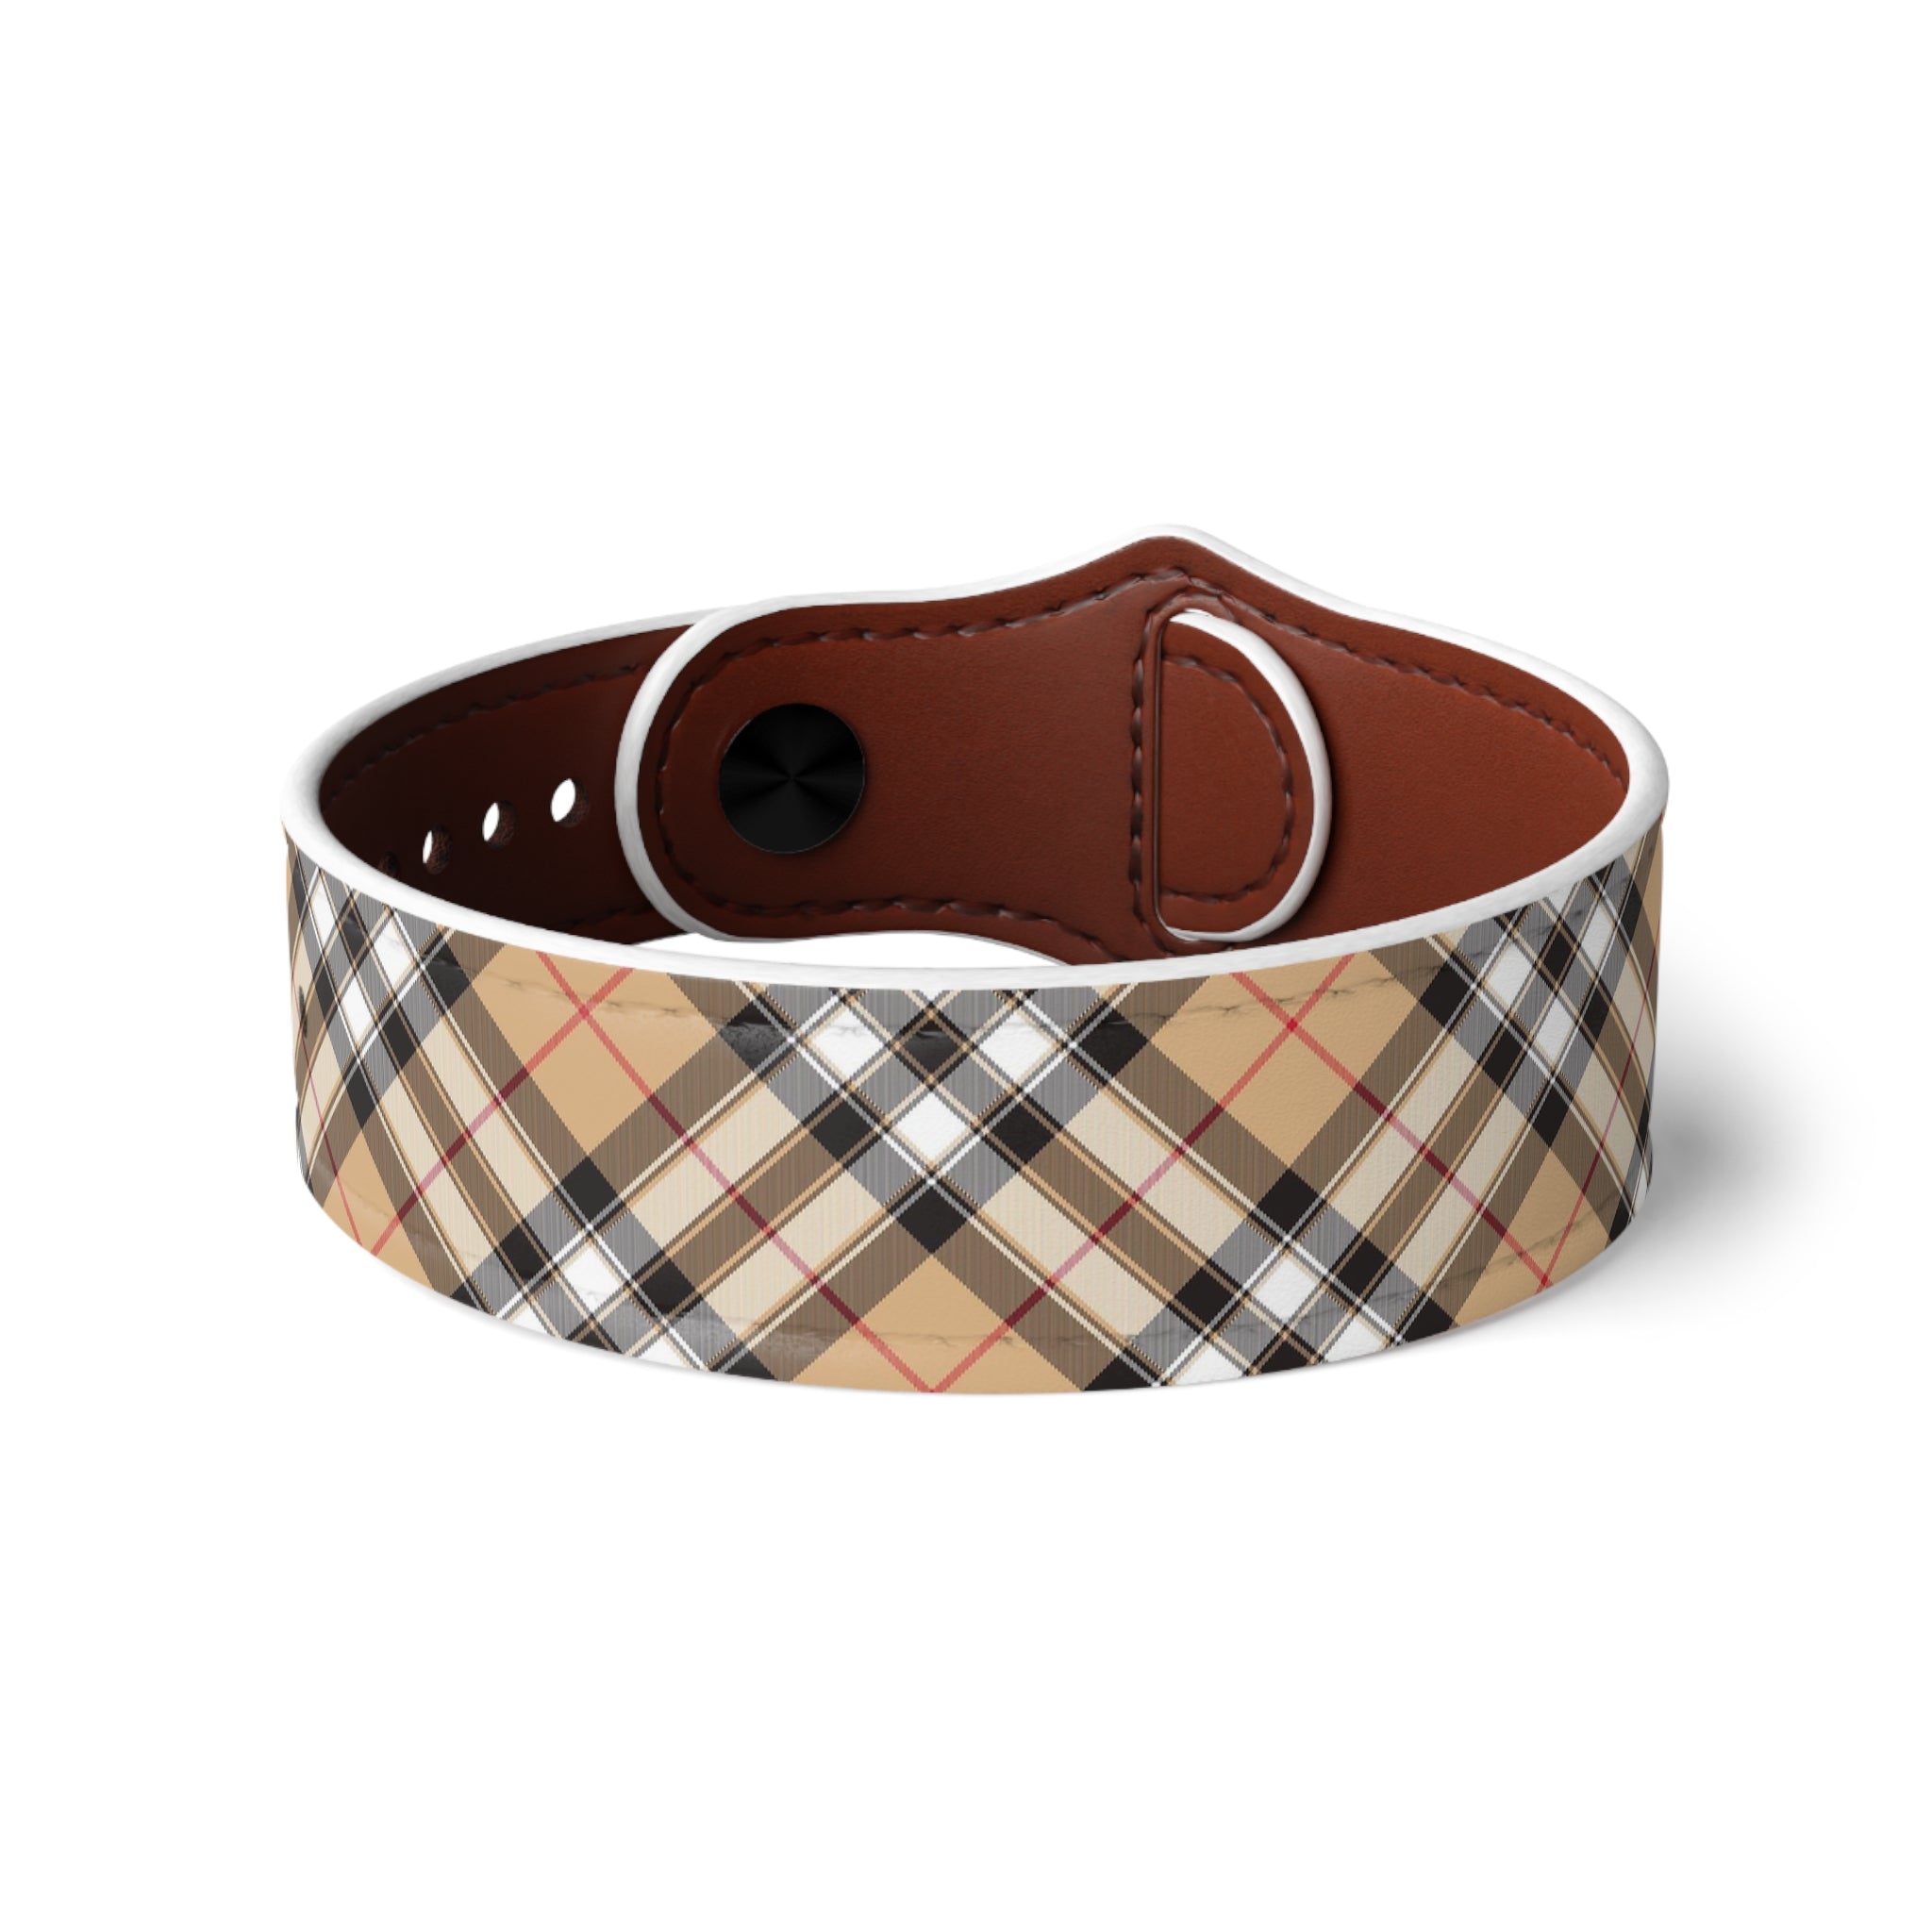 Casual Wear Accessories in Beige Faux Leather Wristband, Unisex Leather Bracelet, Faux Leather Cuff, Unisex Accessories